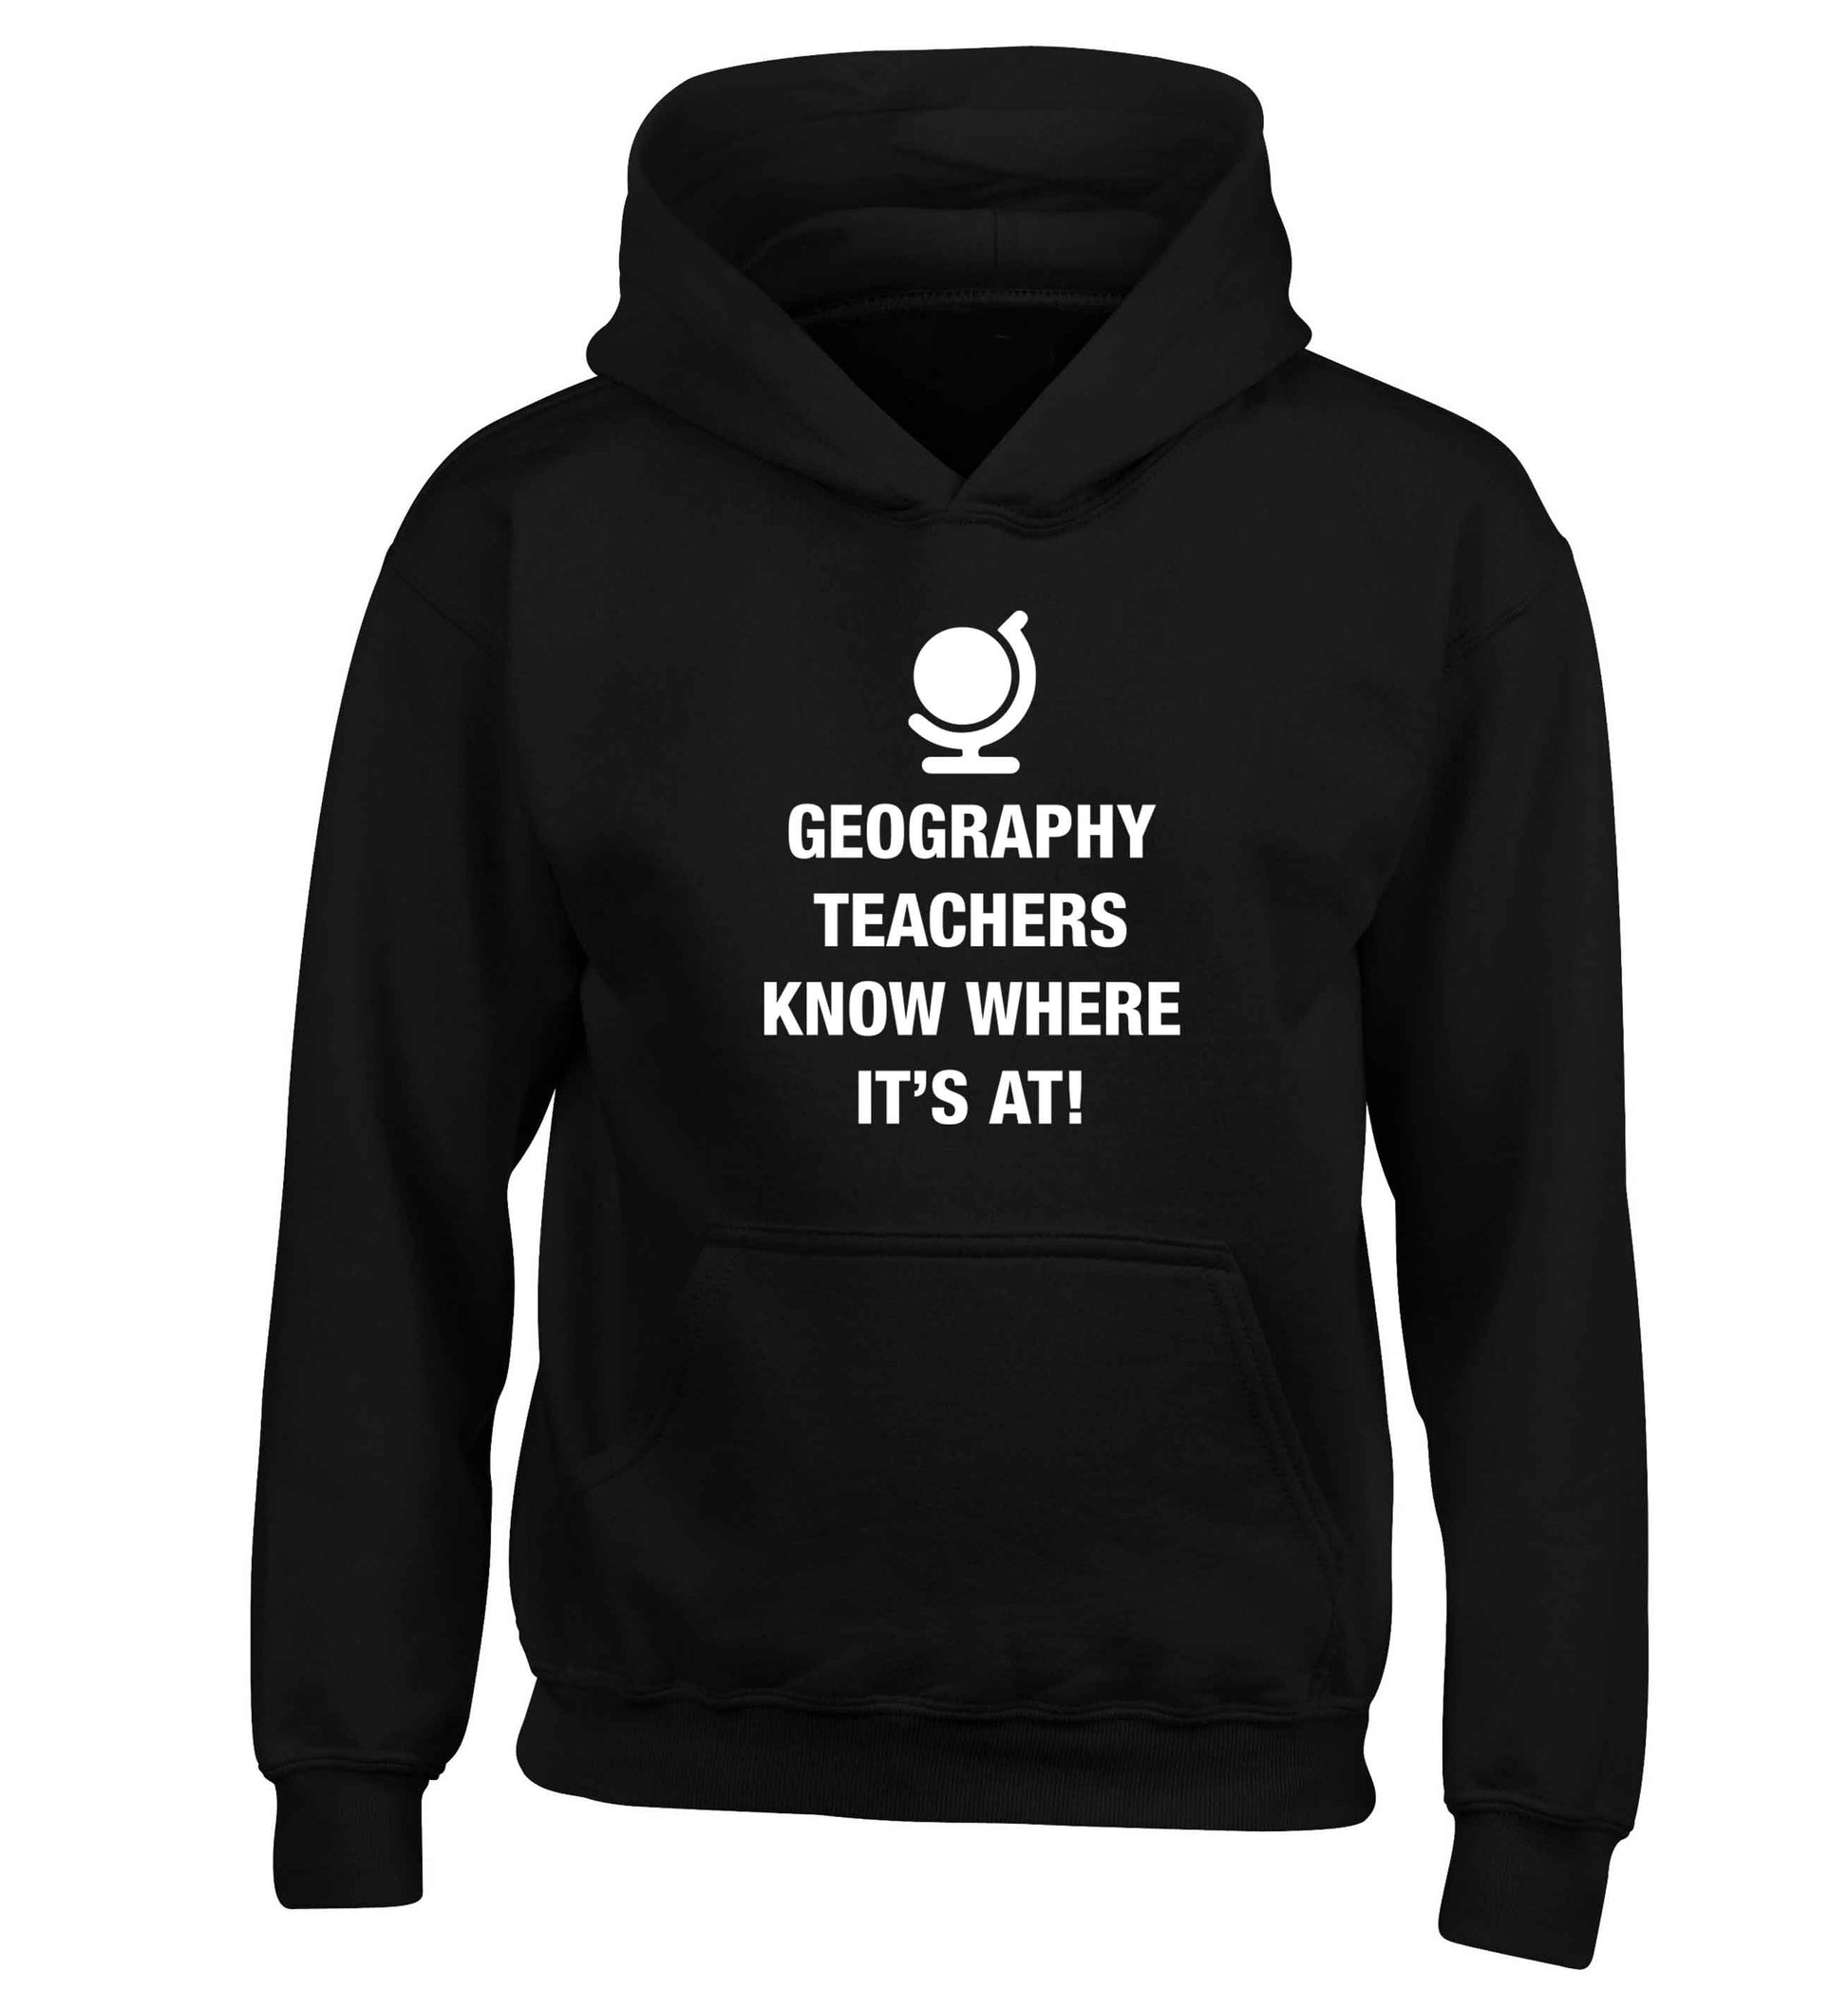 Geography teachers know where it's at children's black hoodie 12-13 Years